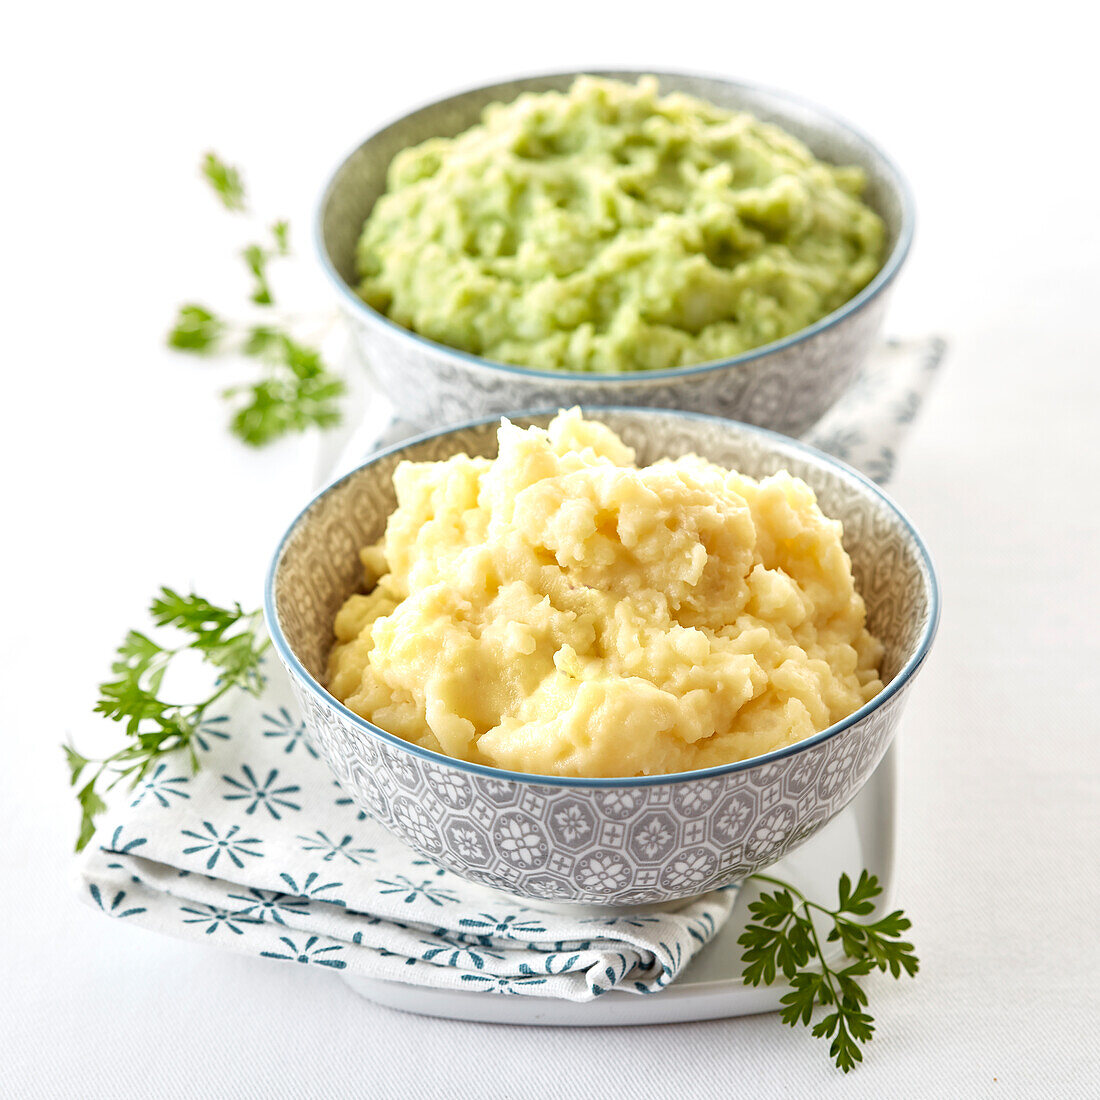 Mashed potatoes and mashed green vegetables